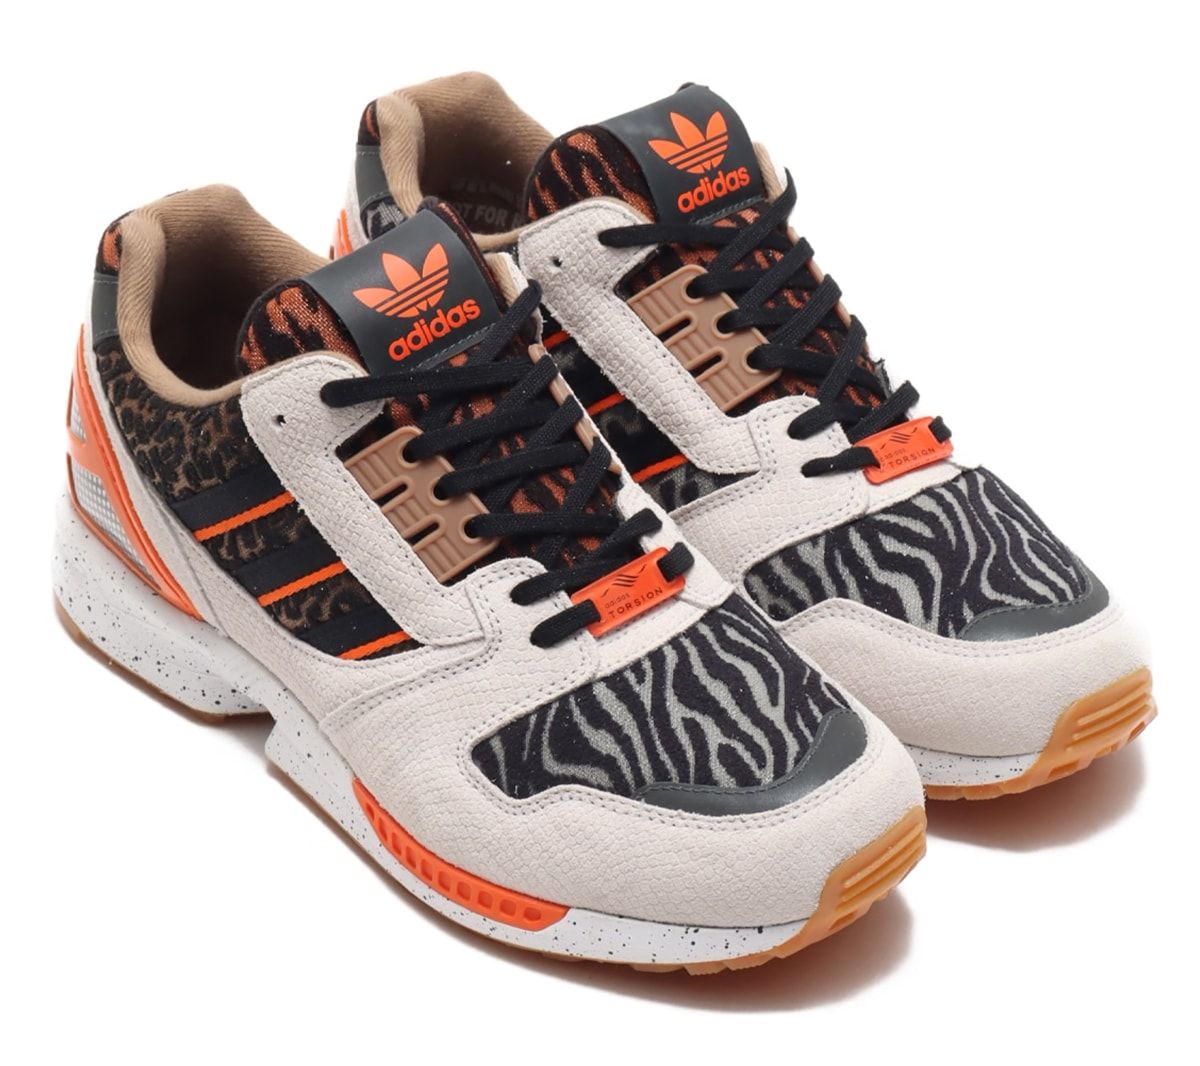 atmos Adds the adidas ZX 8000 to Upcoming 